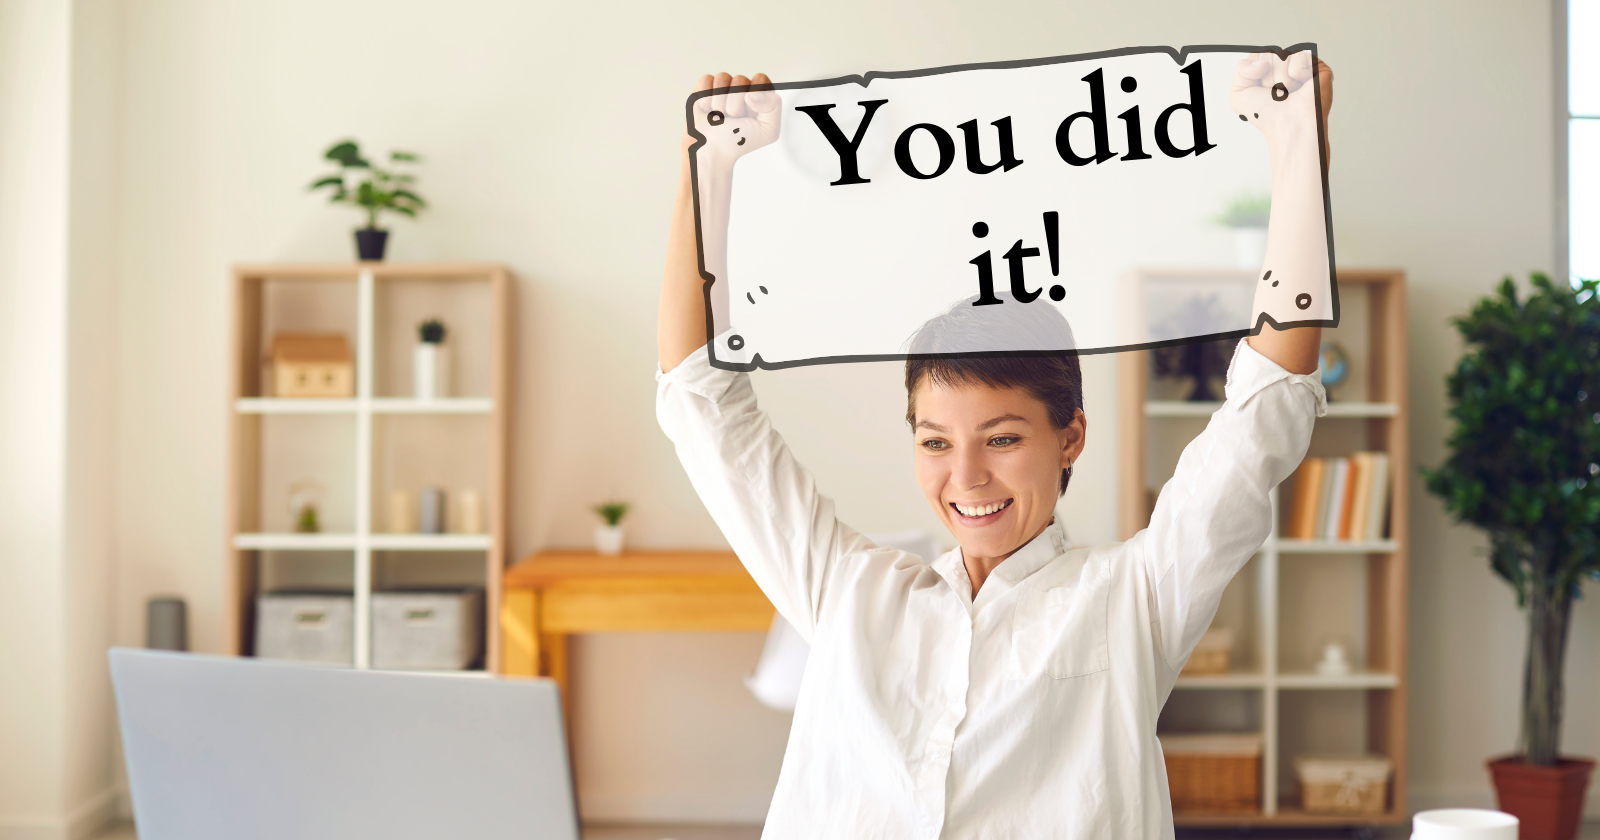 Photo of a person who looks excited, with a sign edited over the top of their hands. The sign reads 'You did it!' - It is meant to be encouraging, to tell others who just completed something to congratulate themselves!